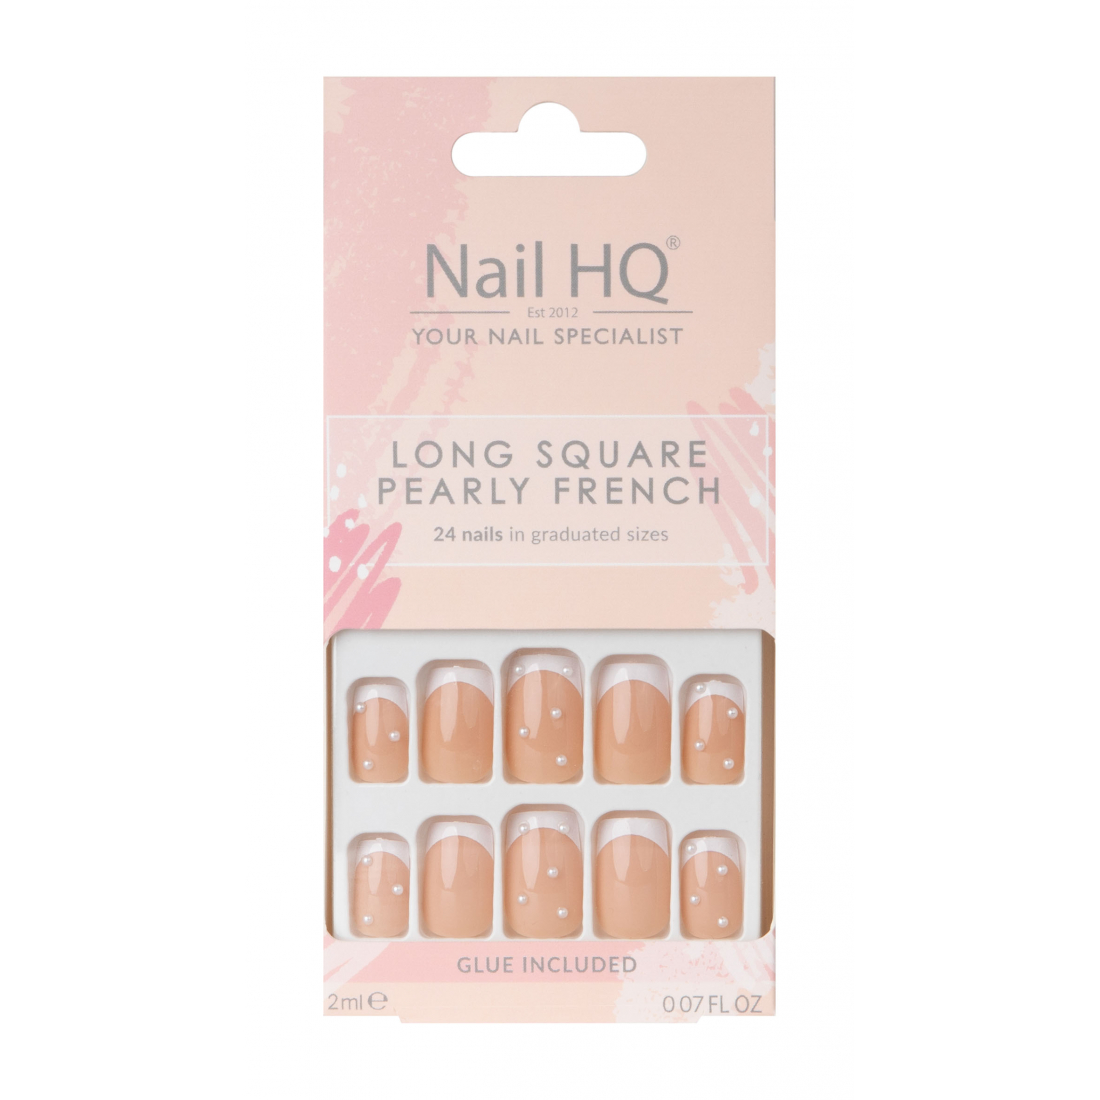 'Long Square Pearly French' Fake Nails -24 Pieces